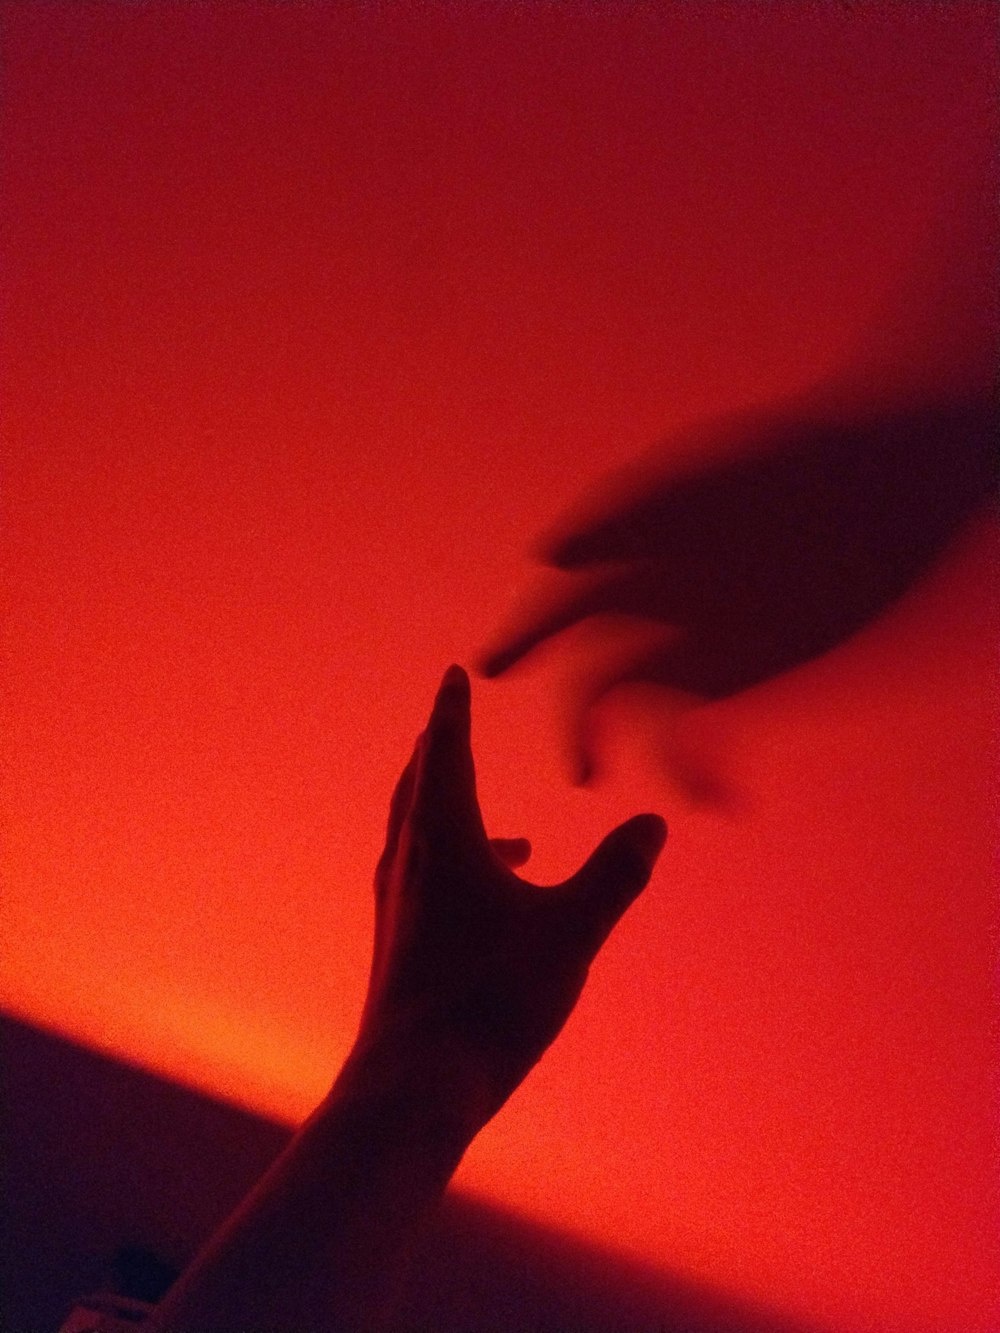 person's hand with shadow